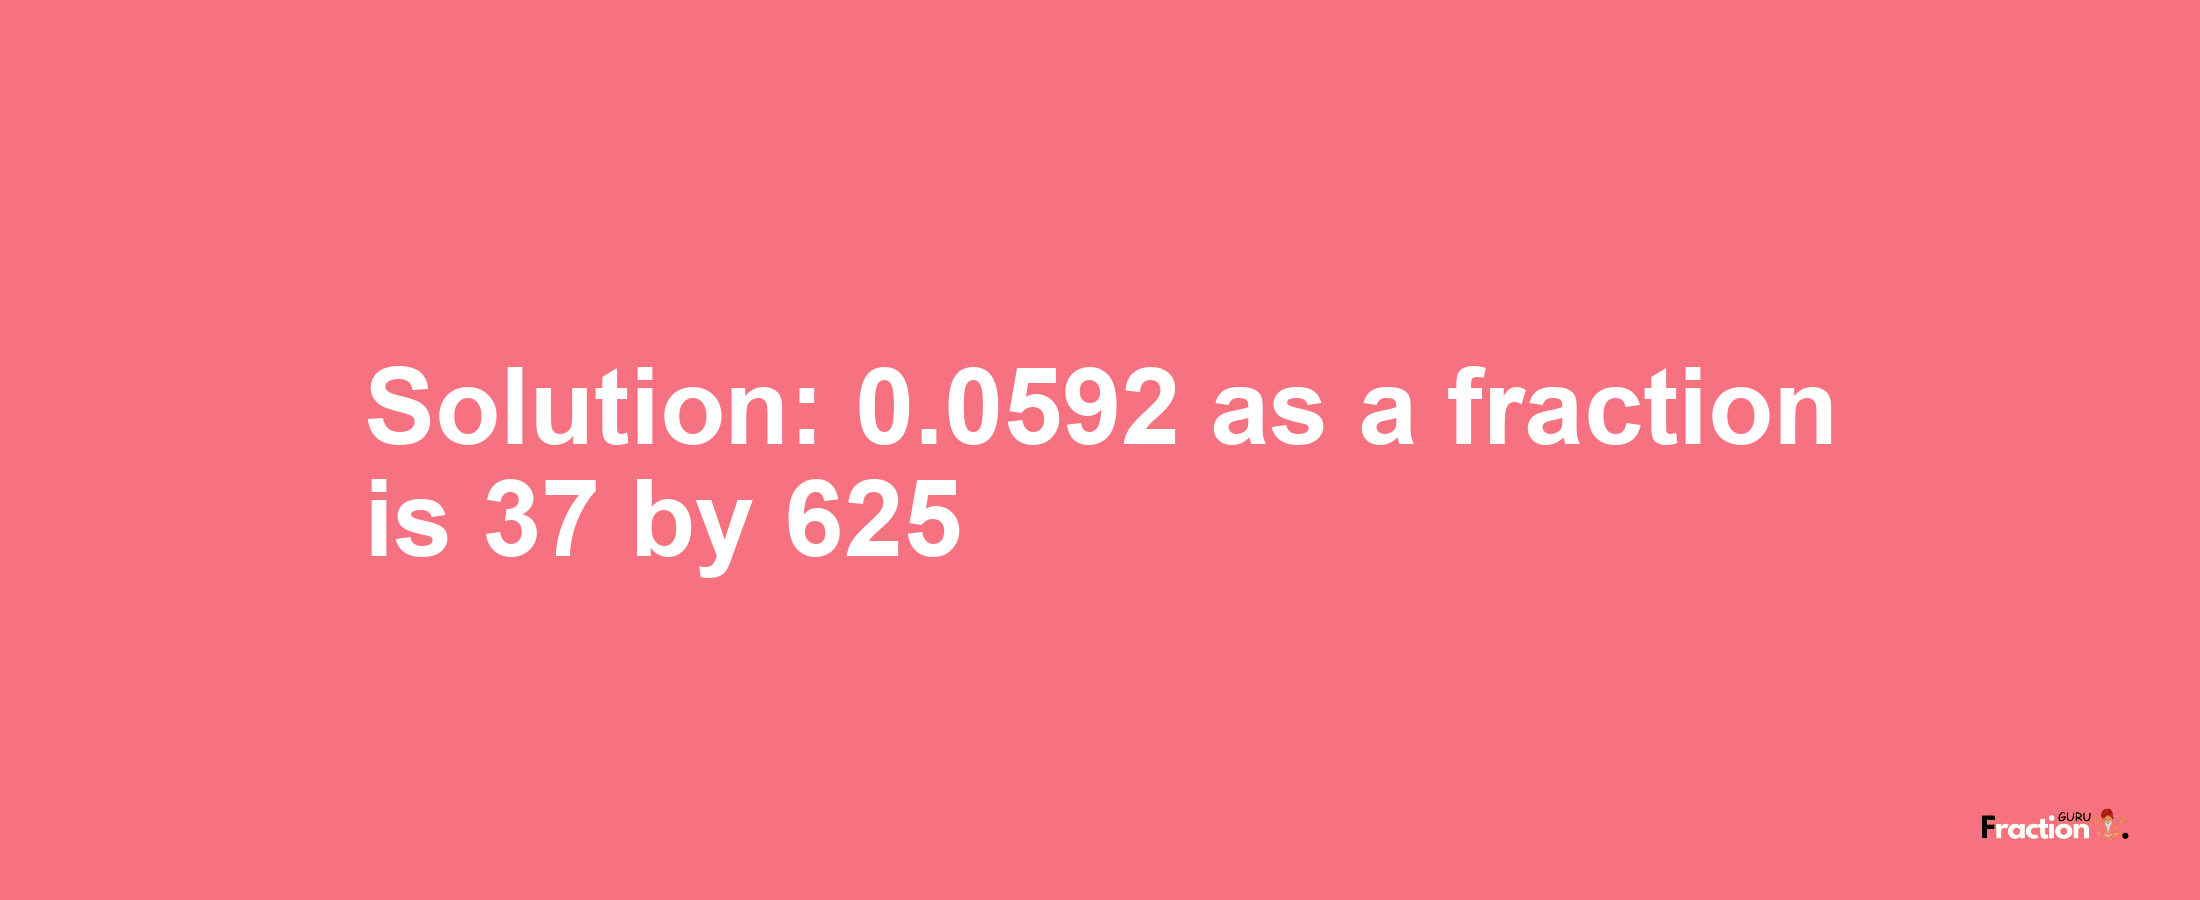 Solution:0.0592 as a fraction is 37/625